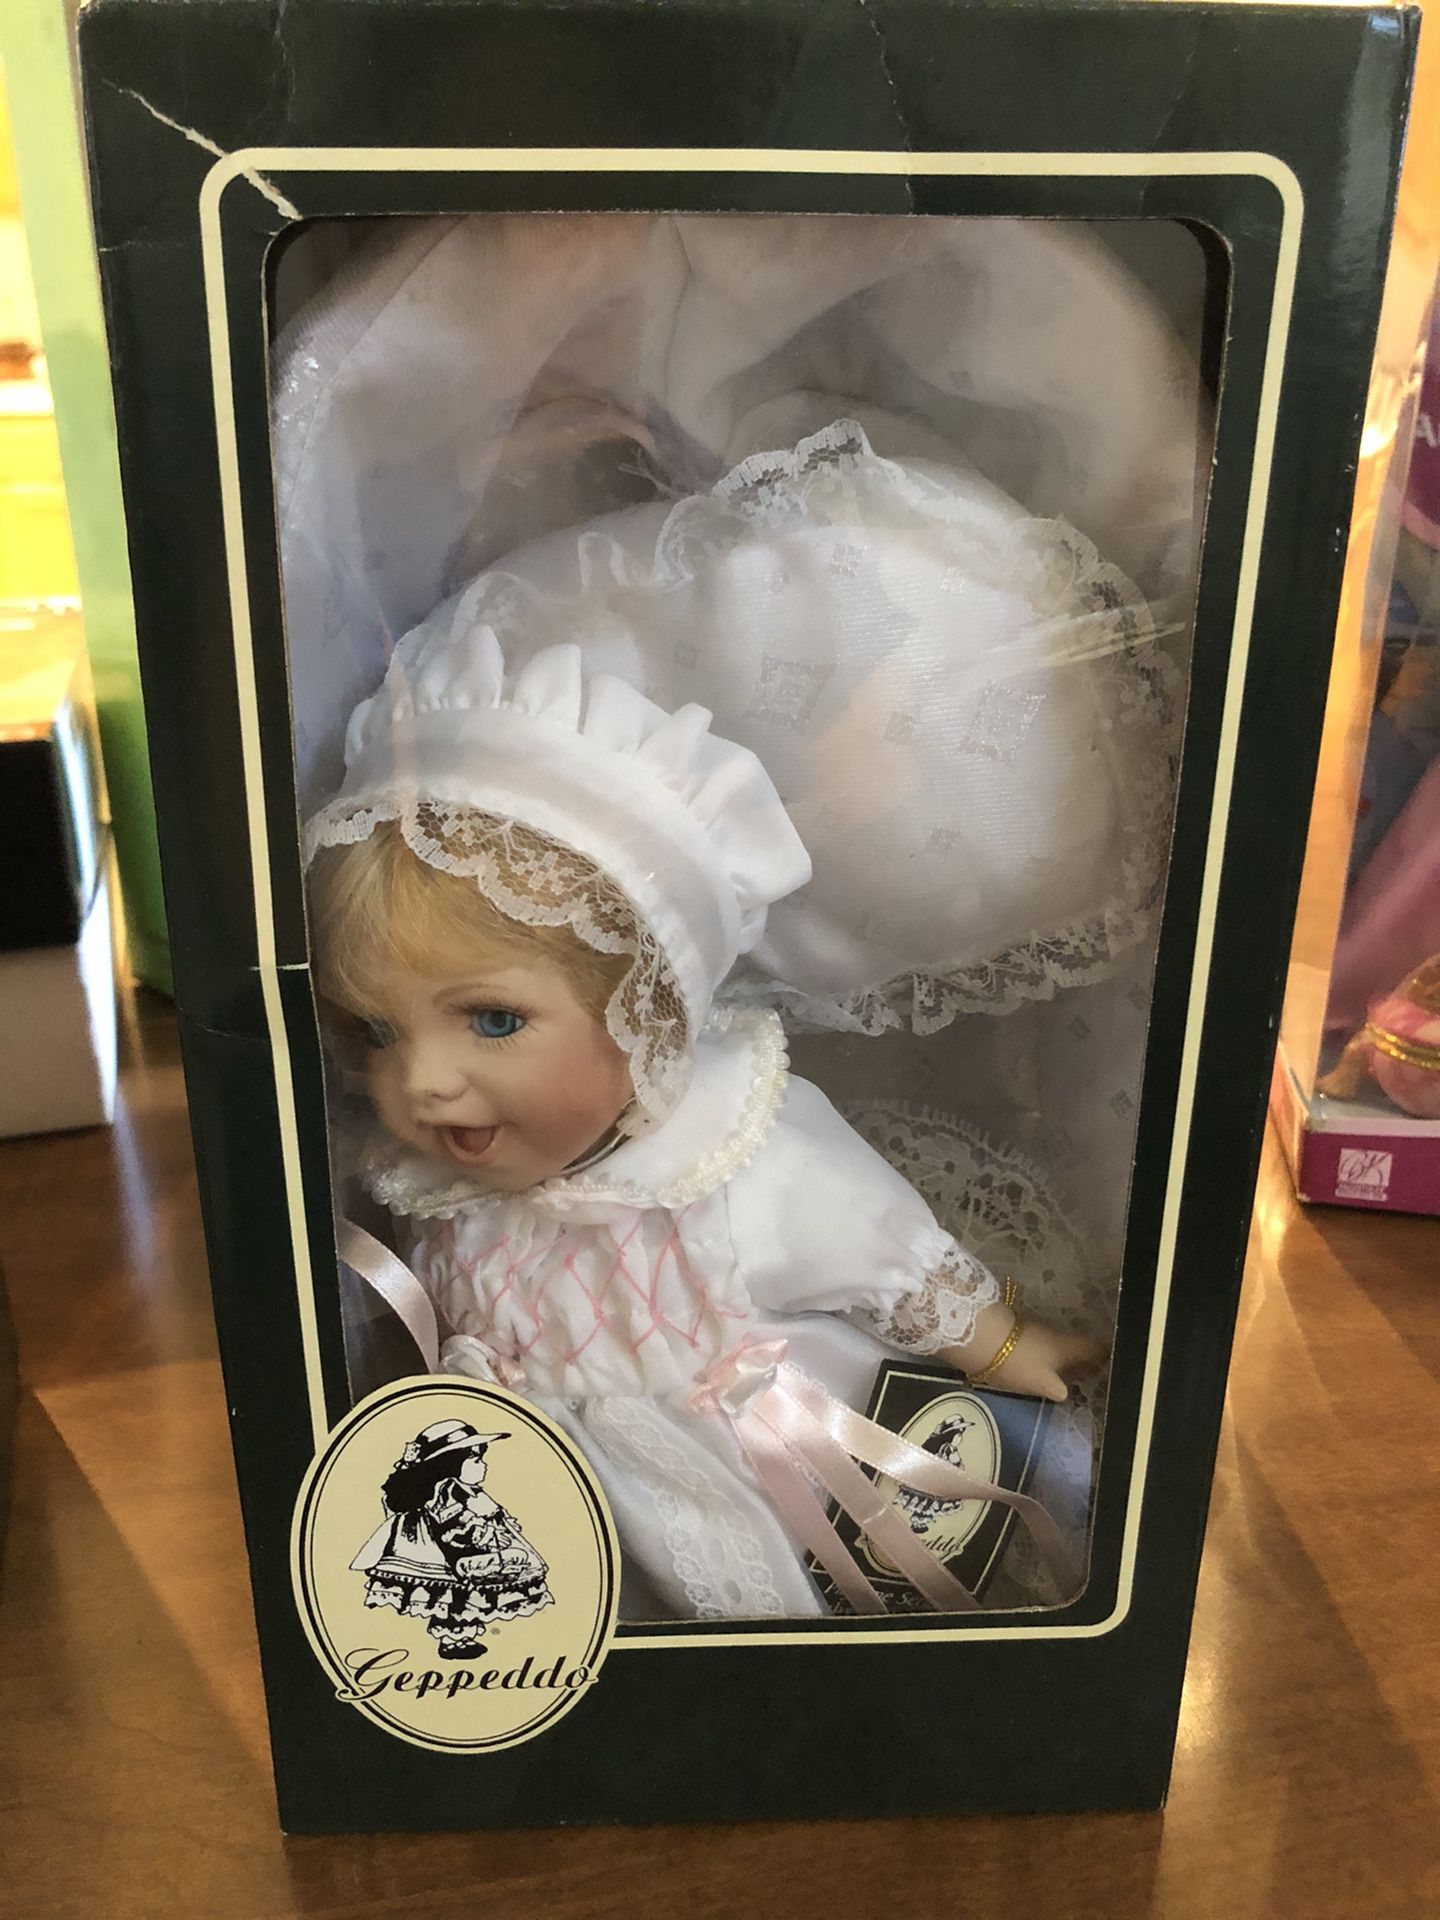 Geppeddo Collector Series Porcelain Doll With Crib 